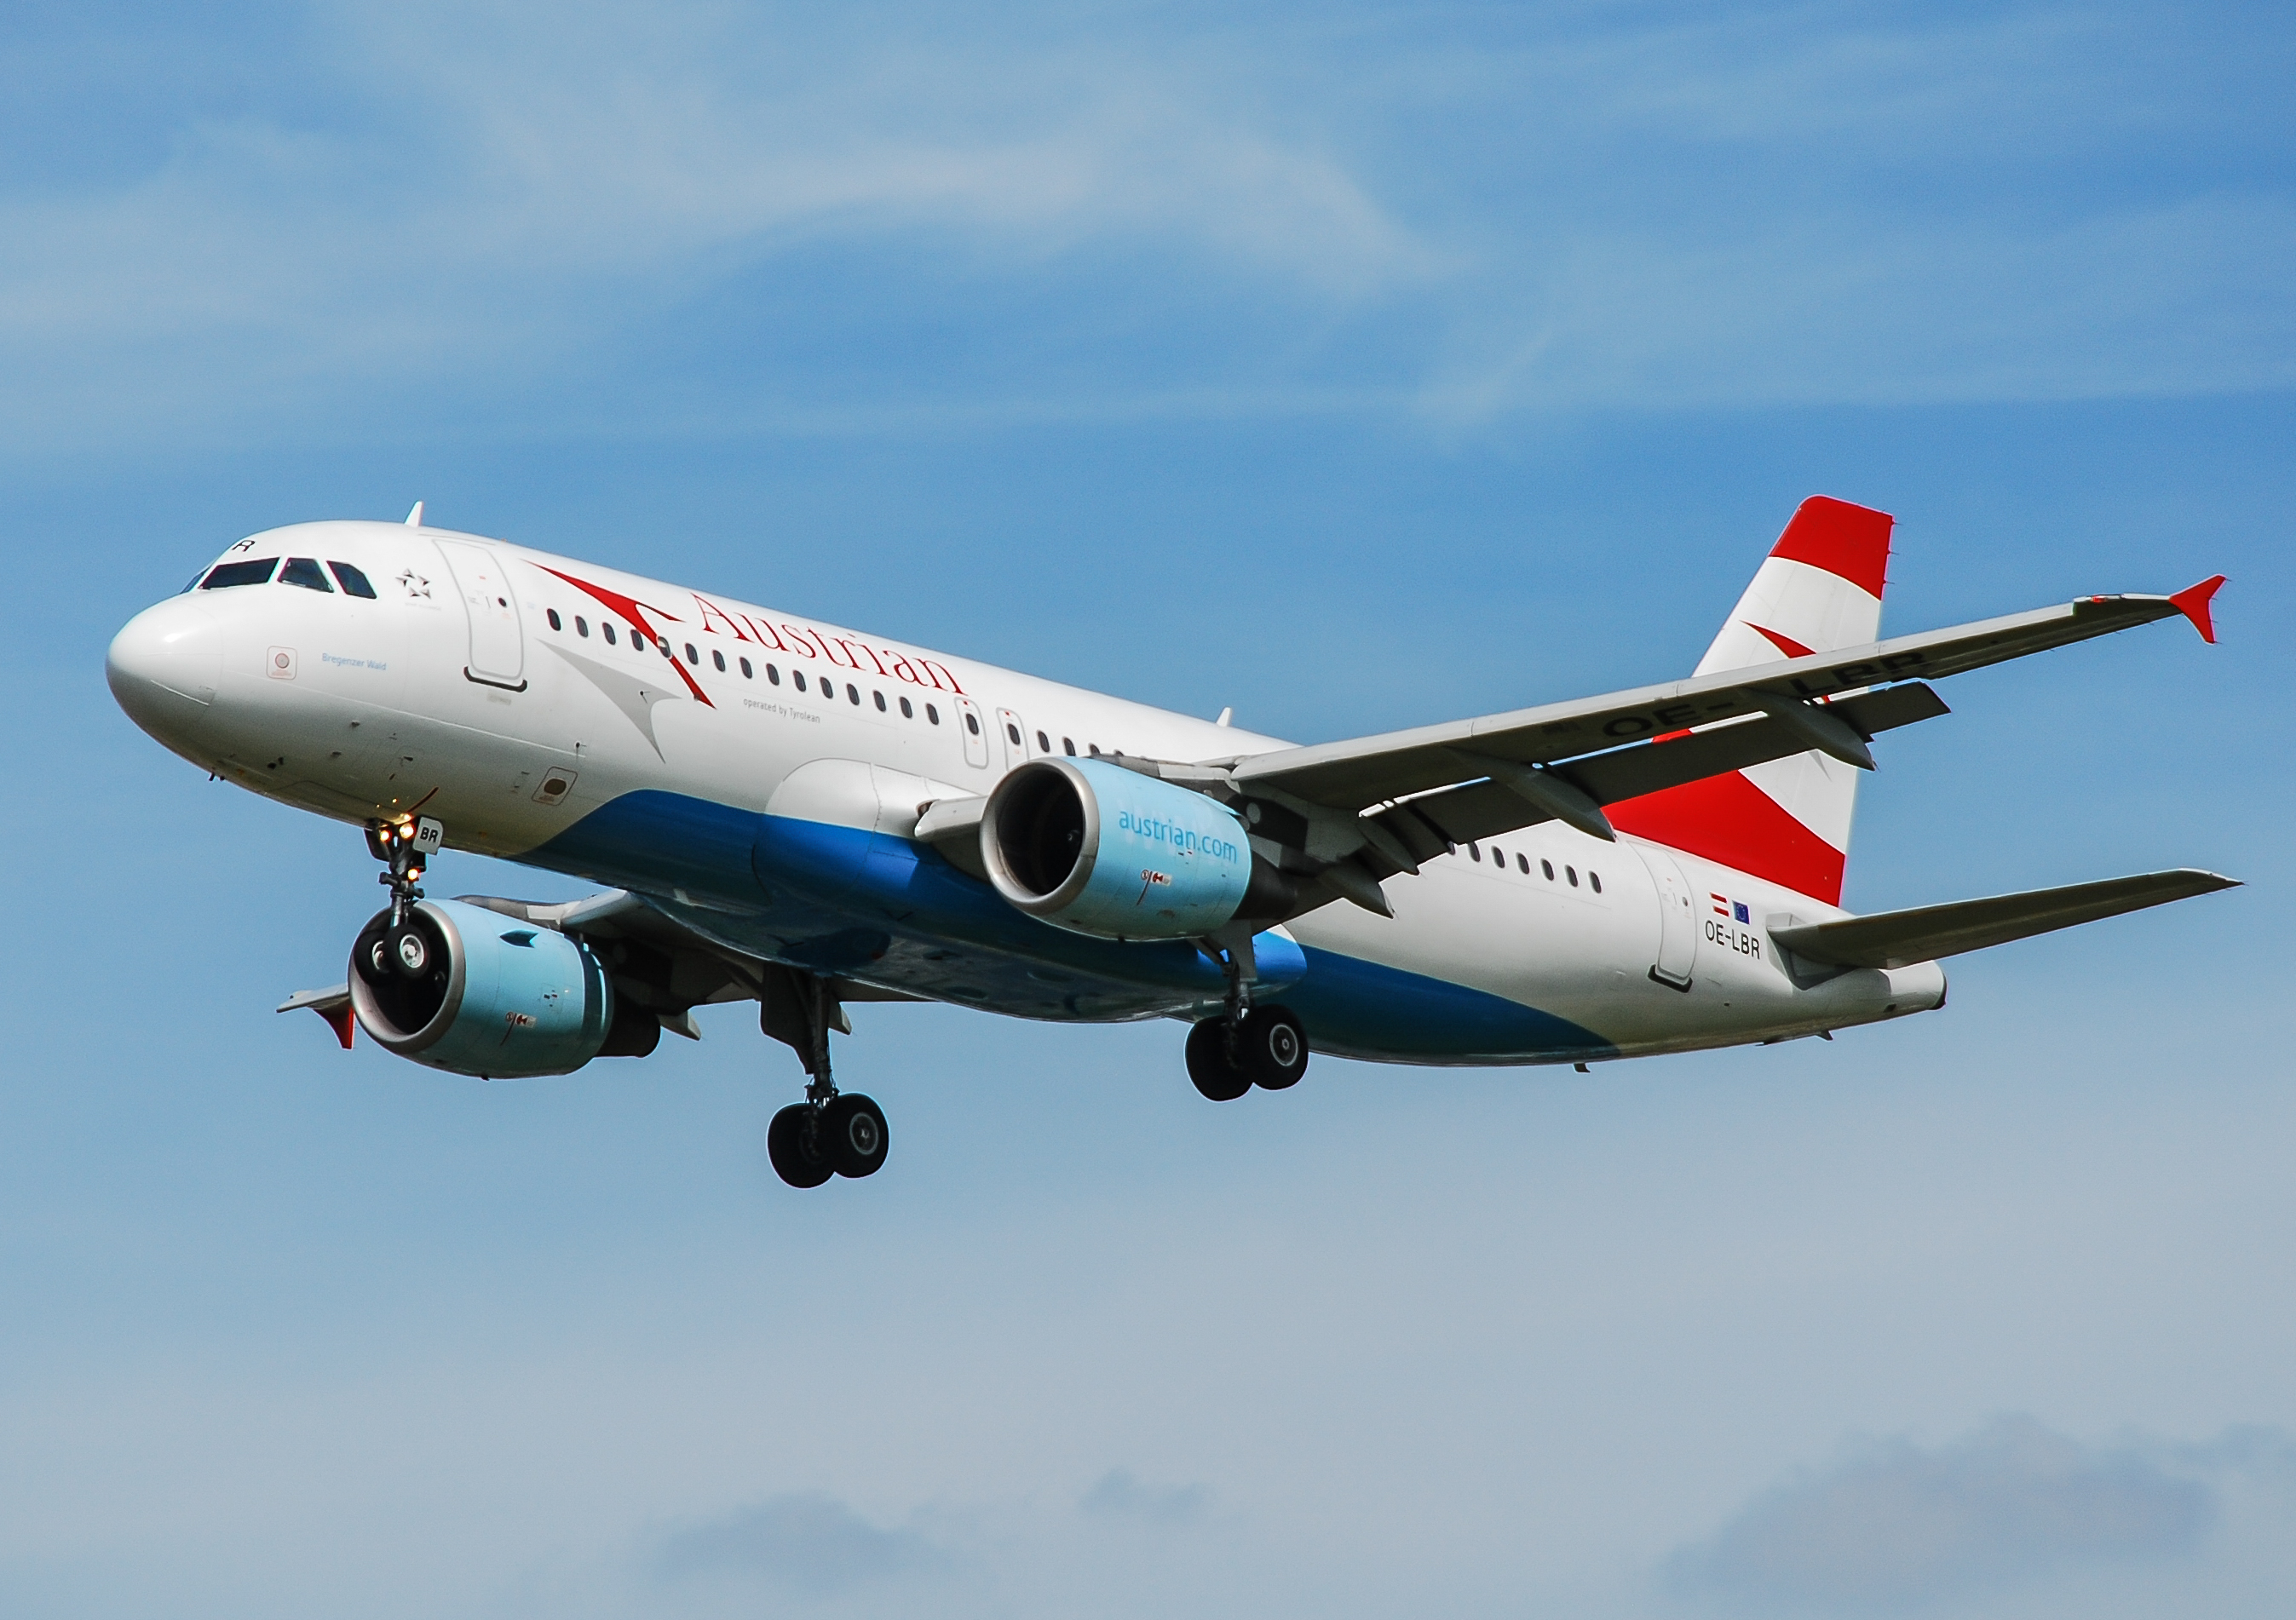 OE-LBR/OELBR Austrian Airlines Airbus A320 Airframe Information - AVSpotters.com